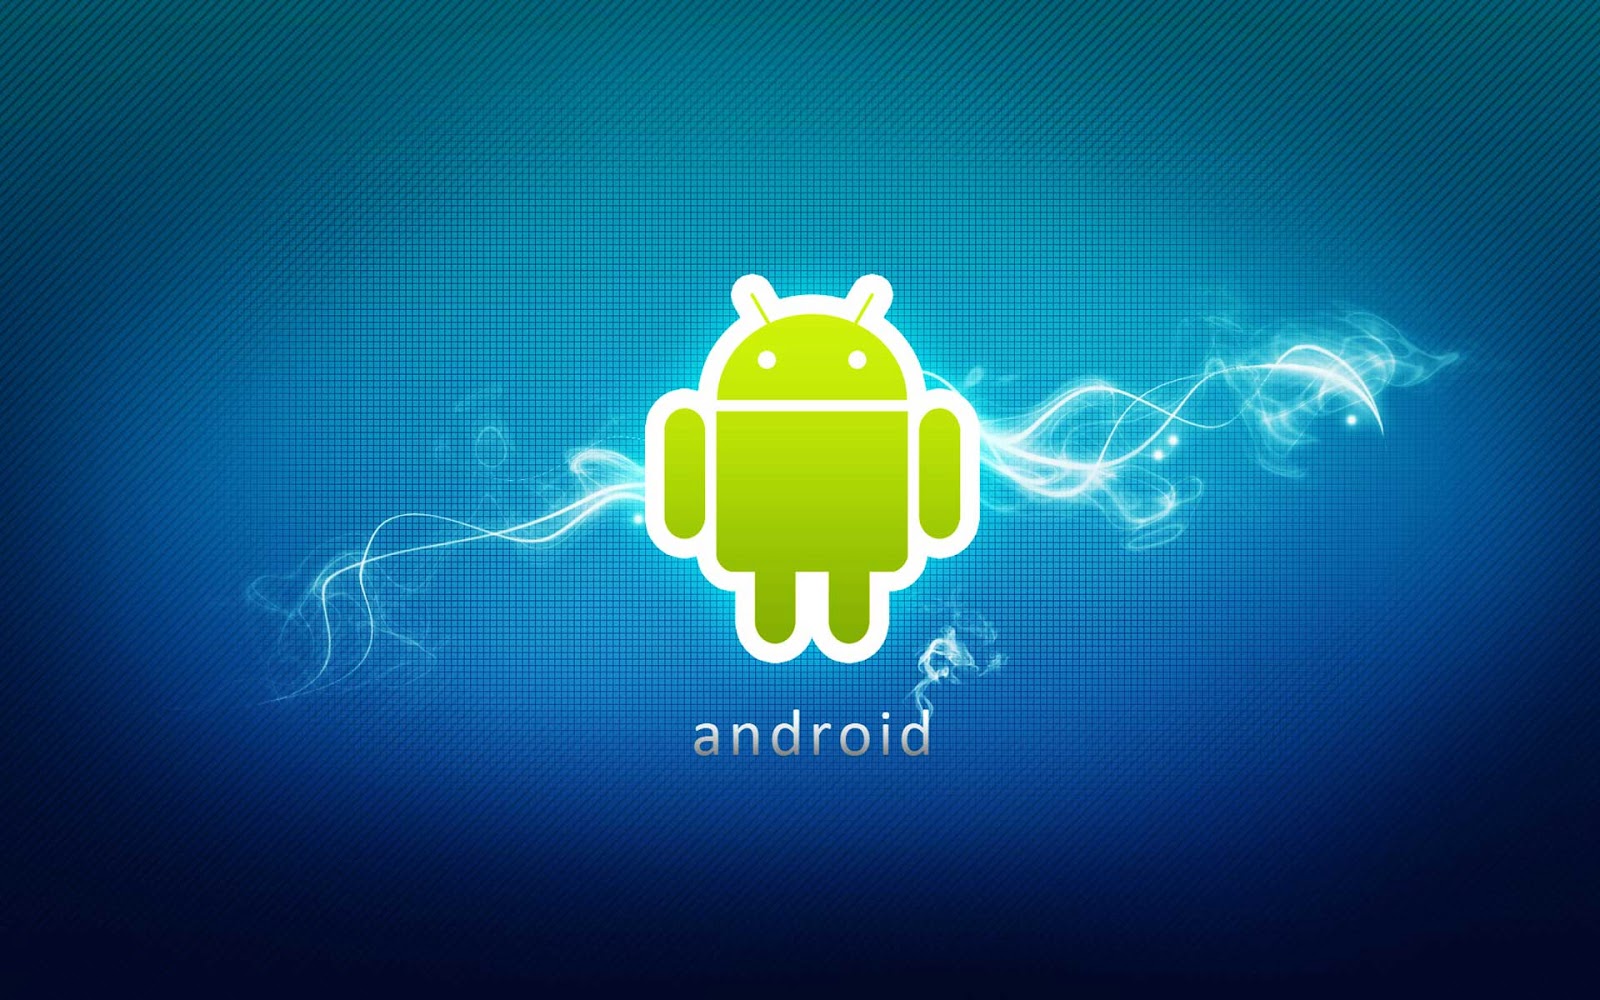 Walpapers Curot: 3D Android Wallpapers